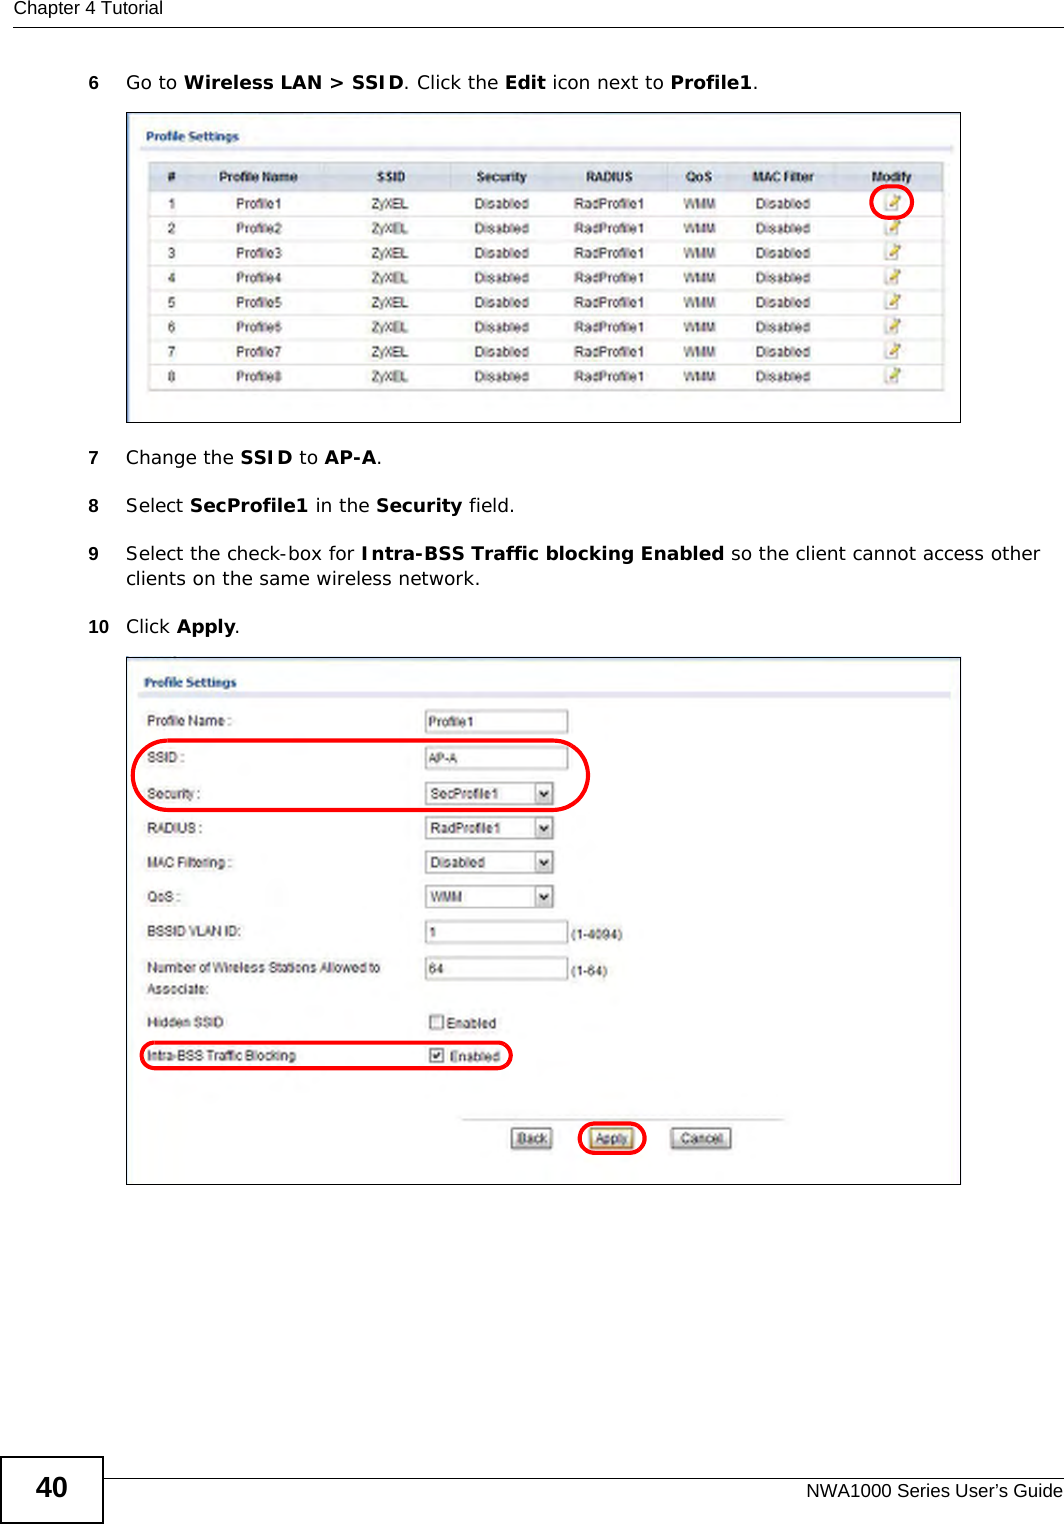 Chapter 4 TutorialNWA1000 Series User’s Guide406Go to Wireless LAN &gt; SSID. Click the Edit icon next to Profile1.7Change the SSID to AP-A. 8Select SecProfile1 in the Security field. 9Select the check-box for Intra-BSS Traffic blocking Enabled so the client cannot access other clients on the same wireless network.10 Click Apply.